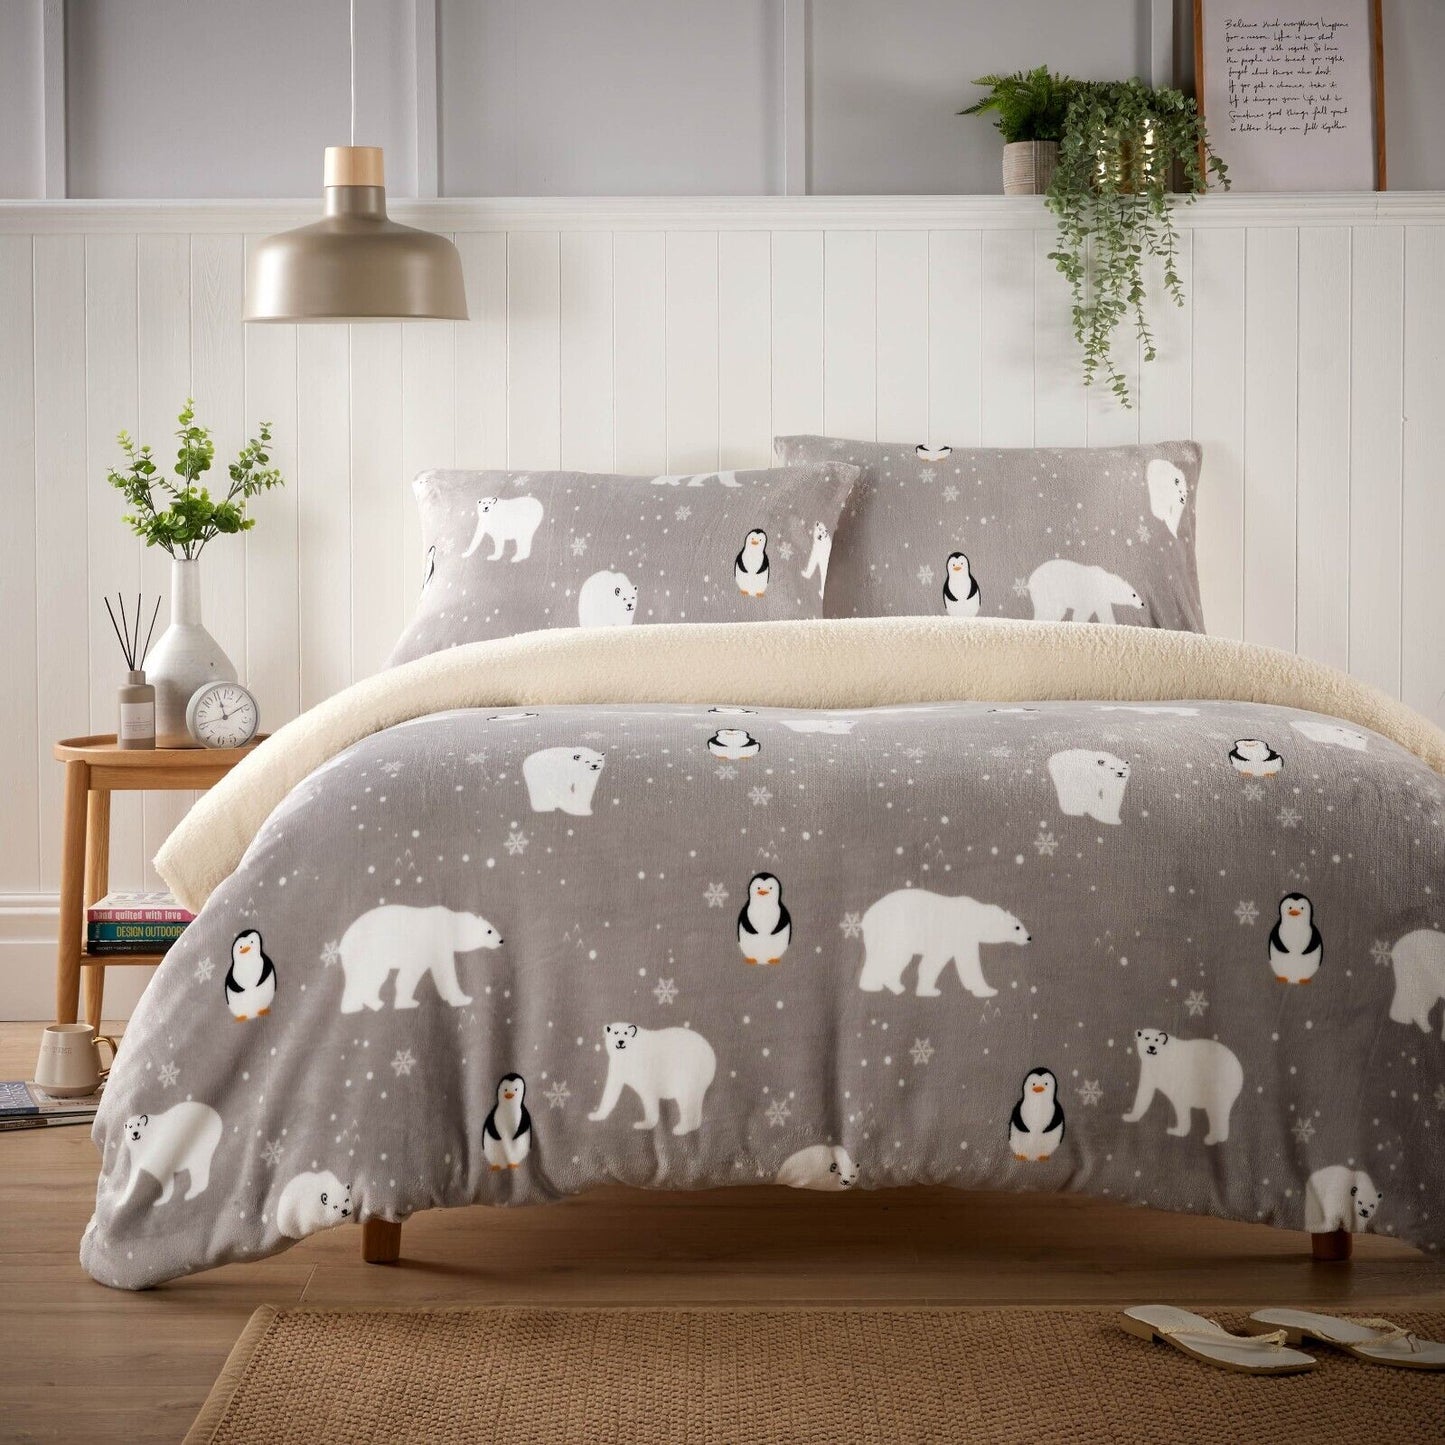 Teddy Fleece Duvet Cover Set Printed Super Soft Quilt Sets Warm Winter Bedding With Sherpa Reverse